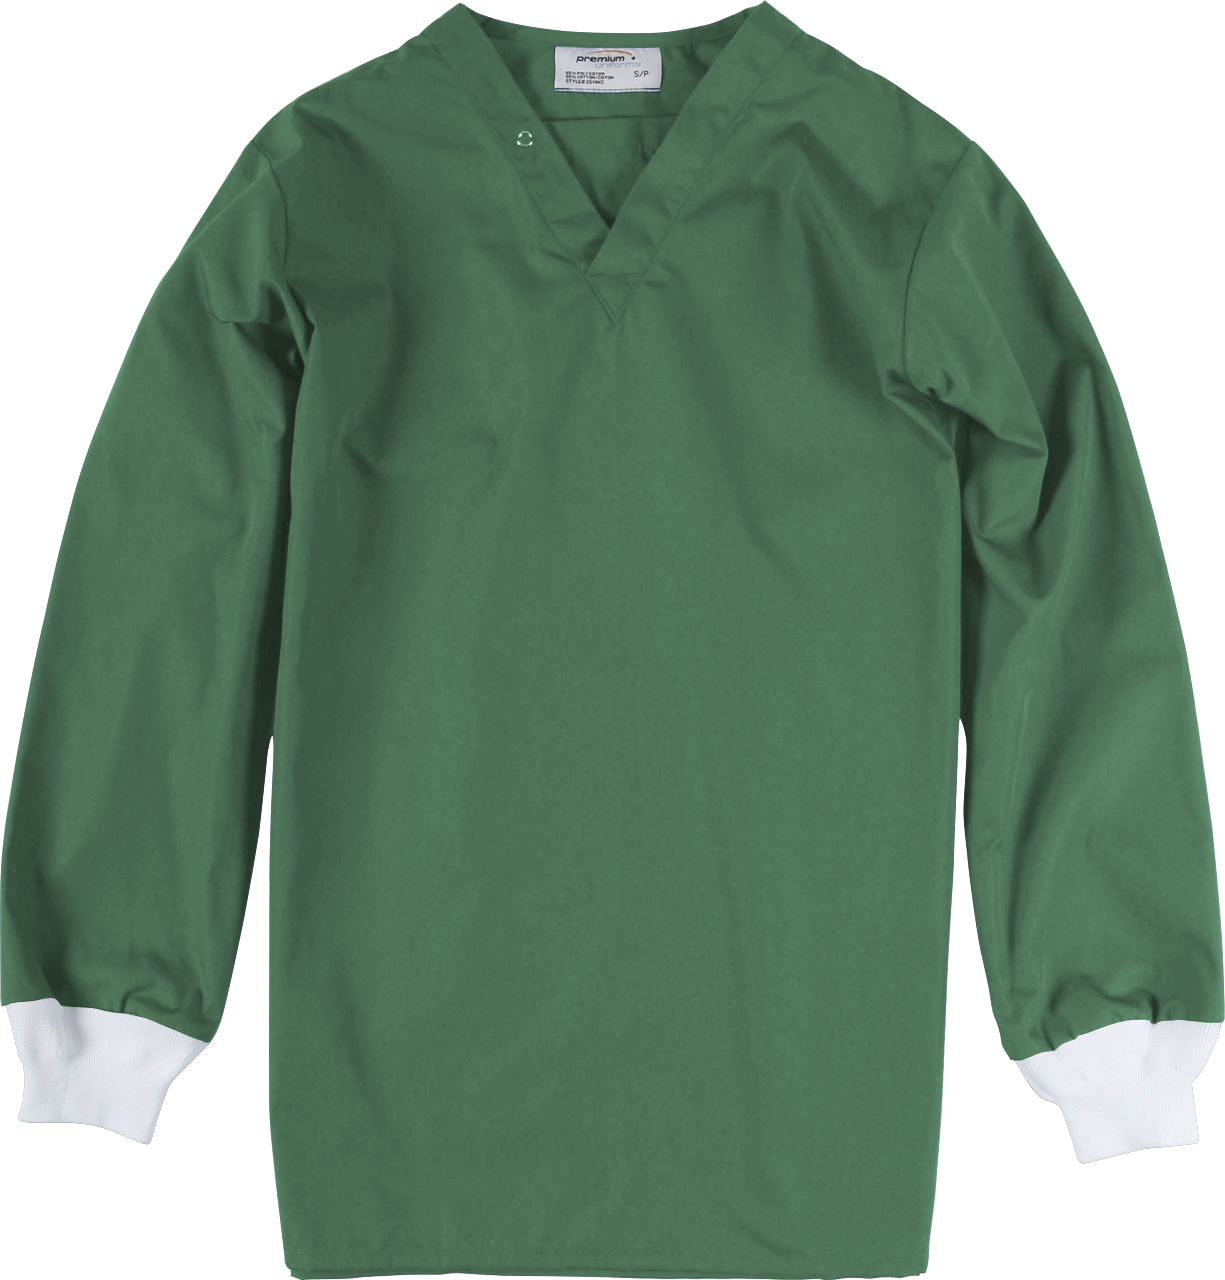 Picture of Premium Uniforms Long Sleeve V-Neck Scrub Top with Knit Cuffs